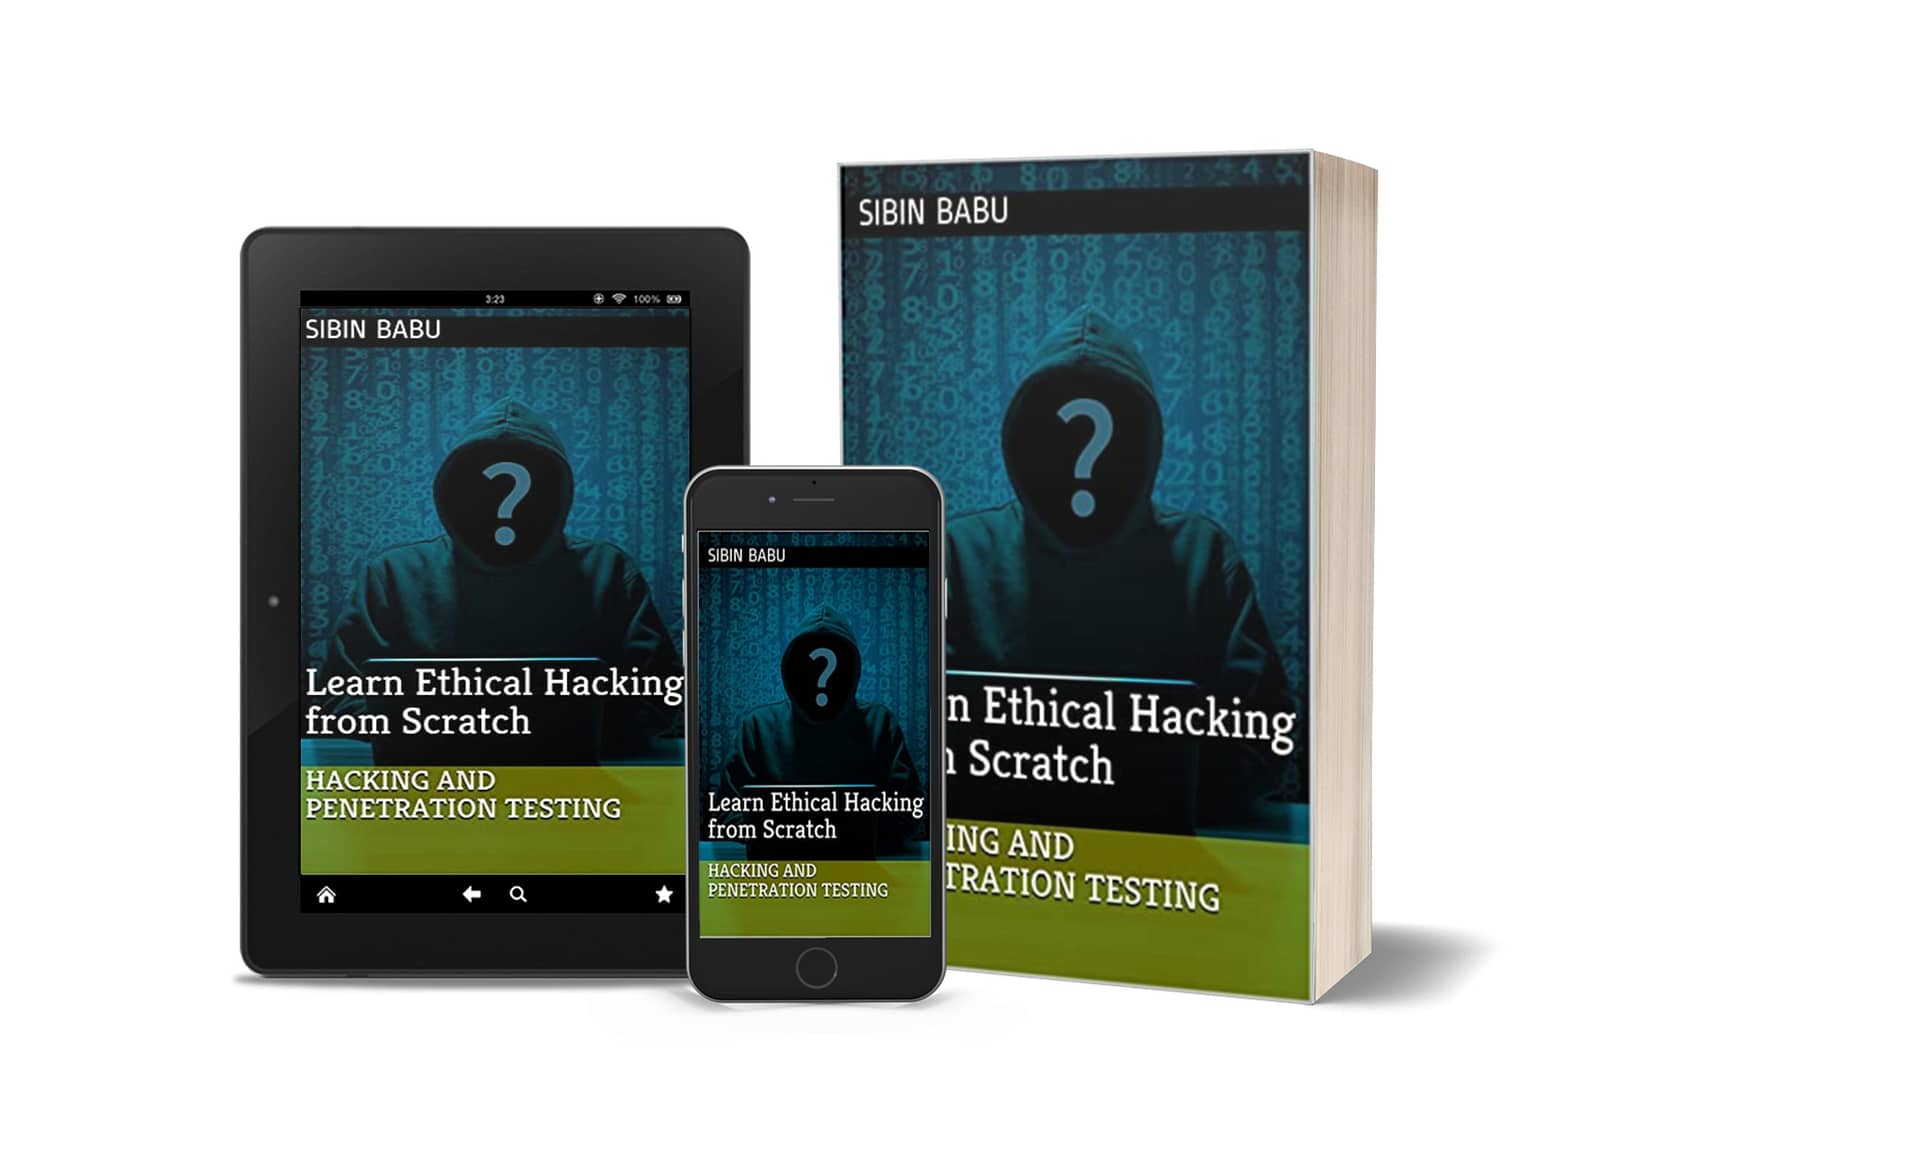 Hacking and Penetration Testing: Learn Ethical Hacking from Scratch